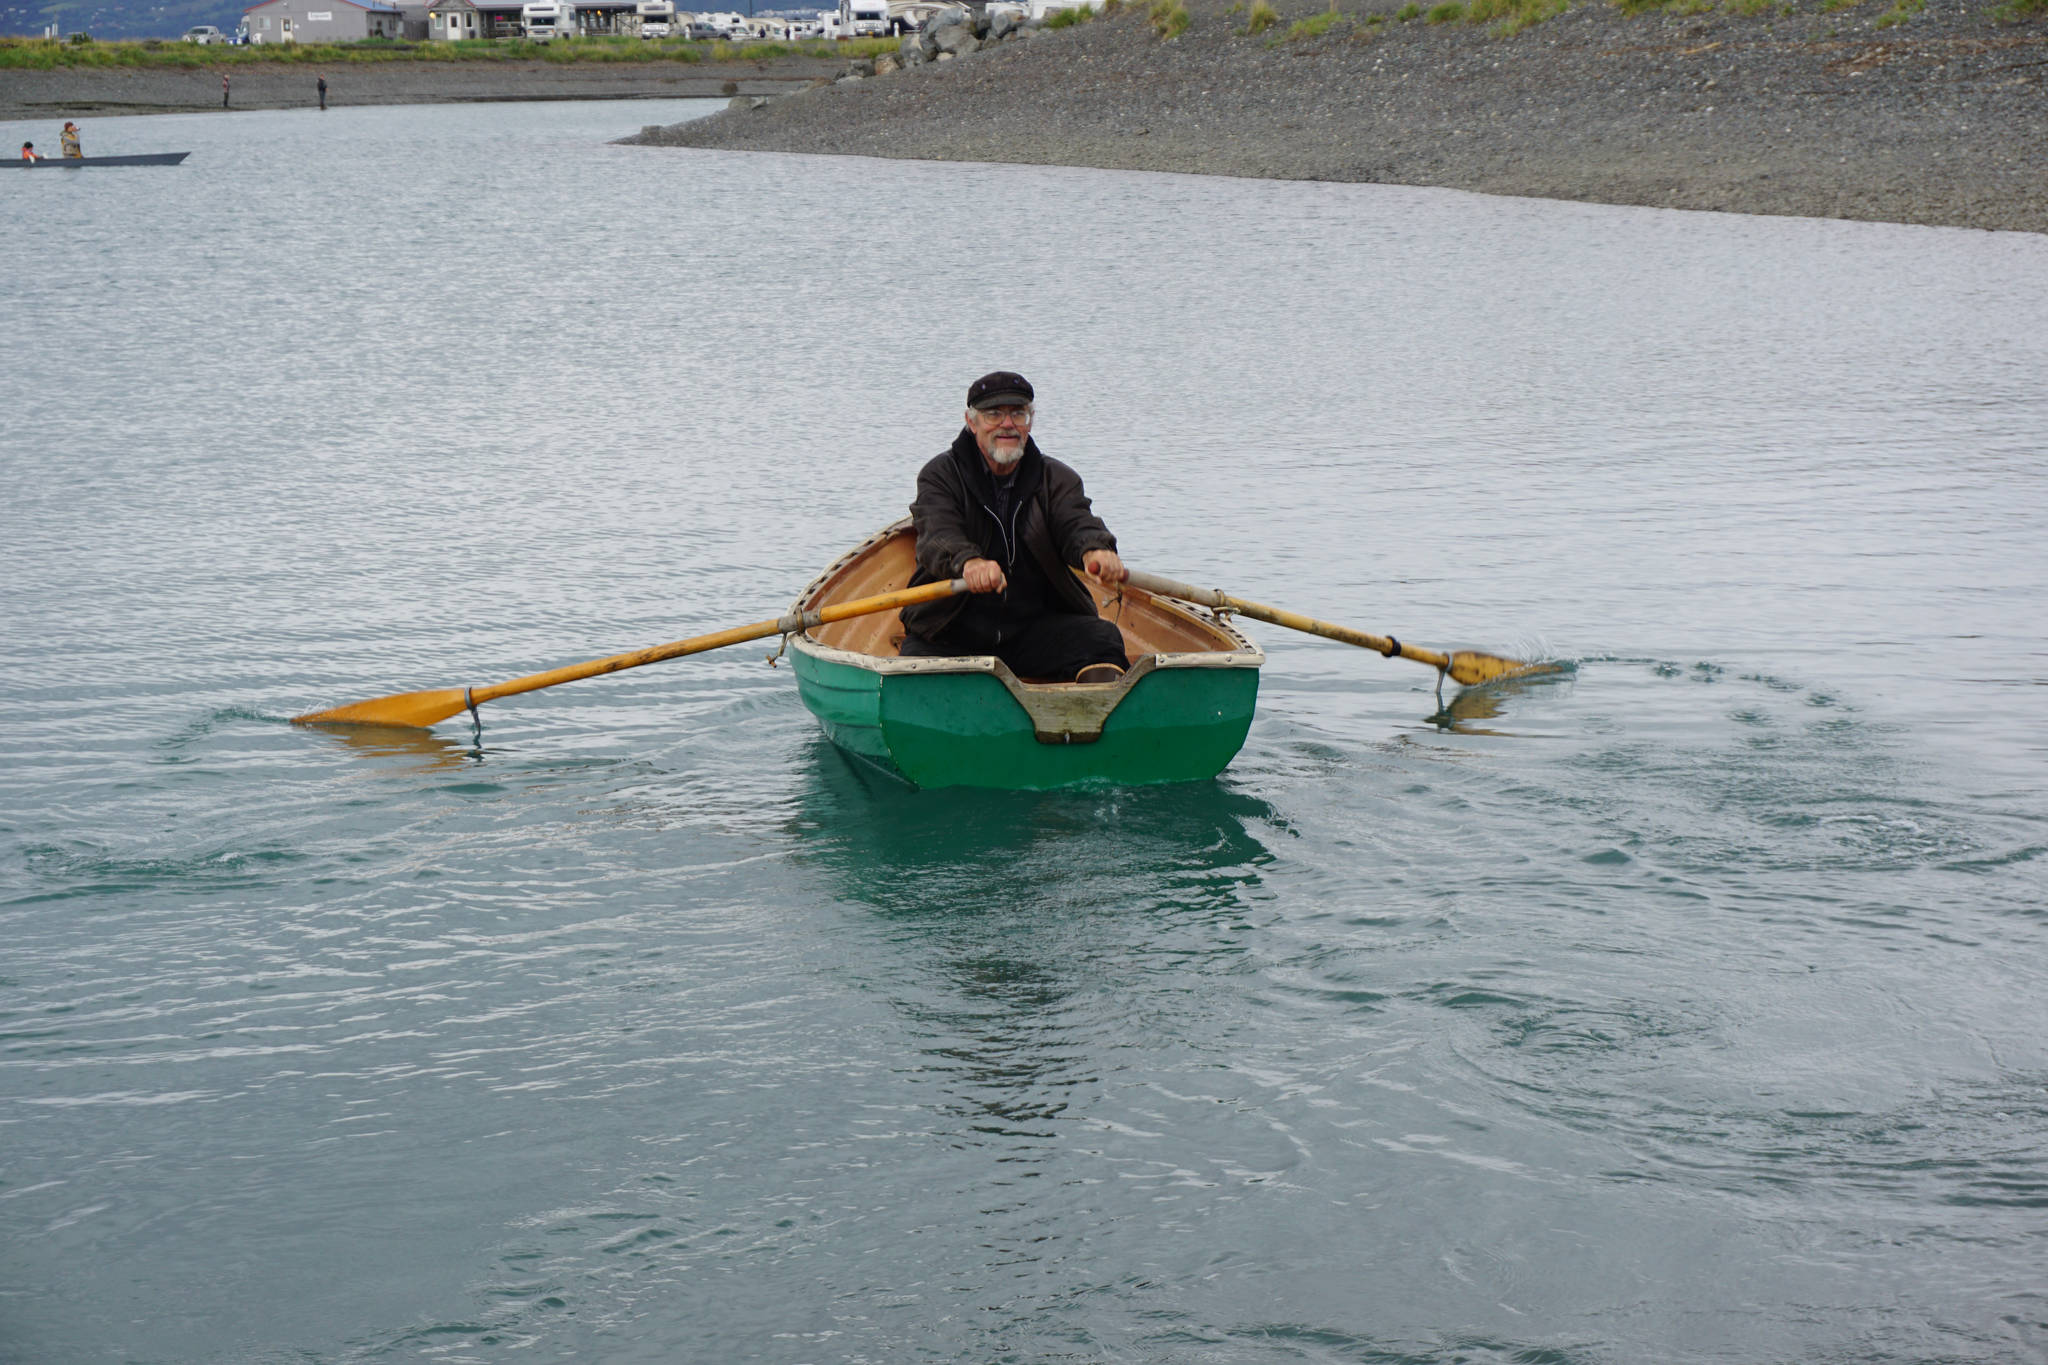 Bumppo Bremicker, president of the Kachemak Bay Wooden Boat Society, rows a boat during the wooden boat festival on Saturday, Sept. 2, 2017 at the Nick Dudiak Fishing Lagoon campground in Homer, Alaska. (Photo by Michael Armstrong, Homer News)